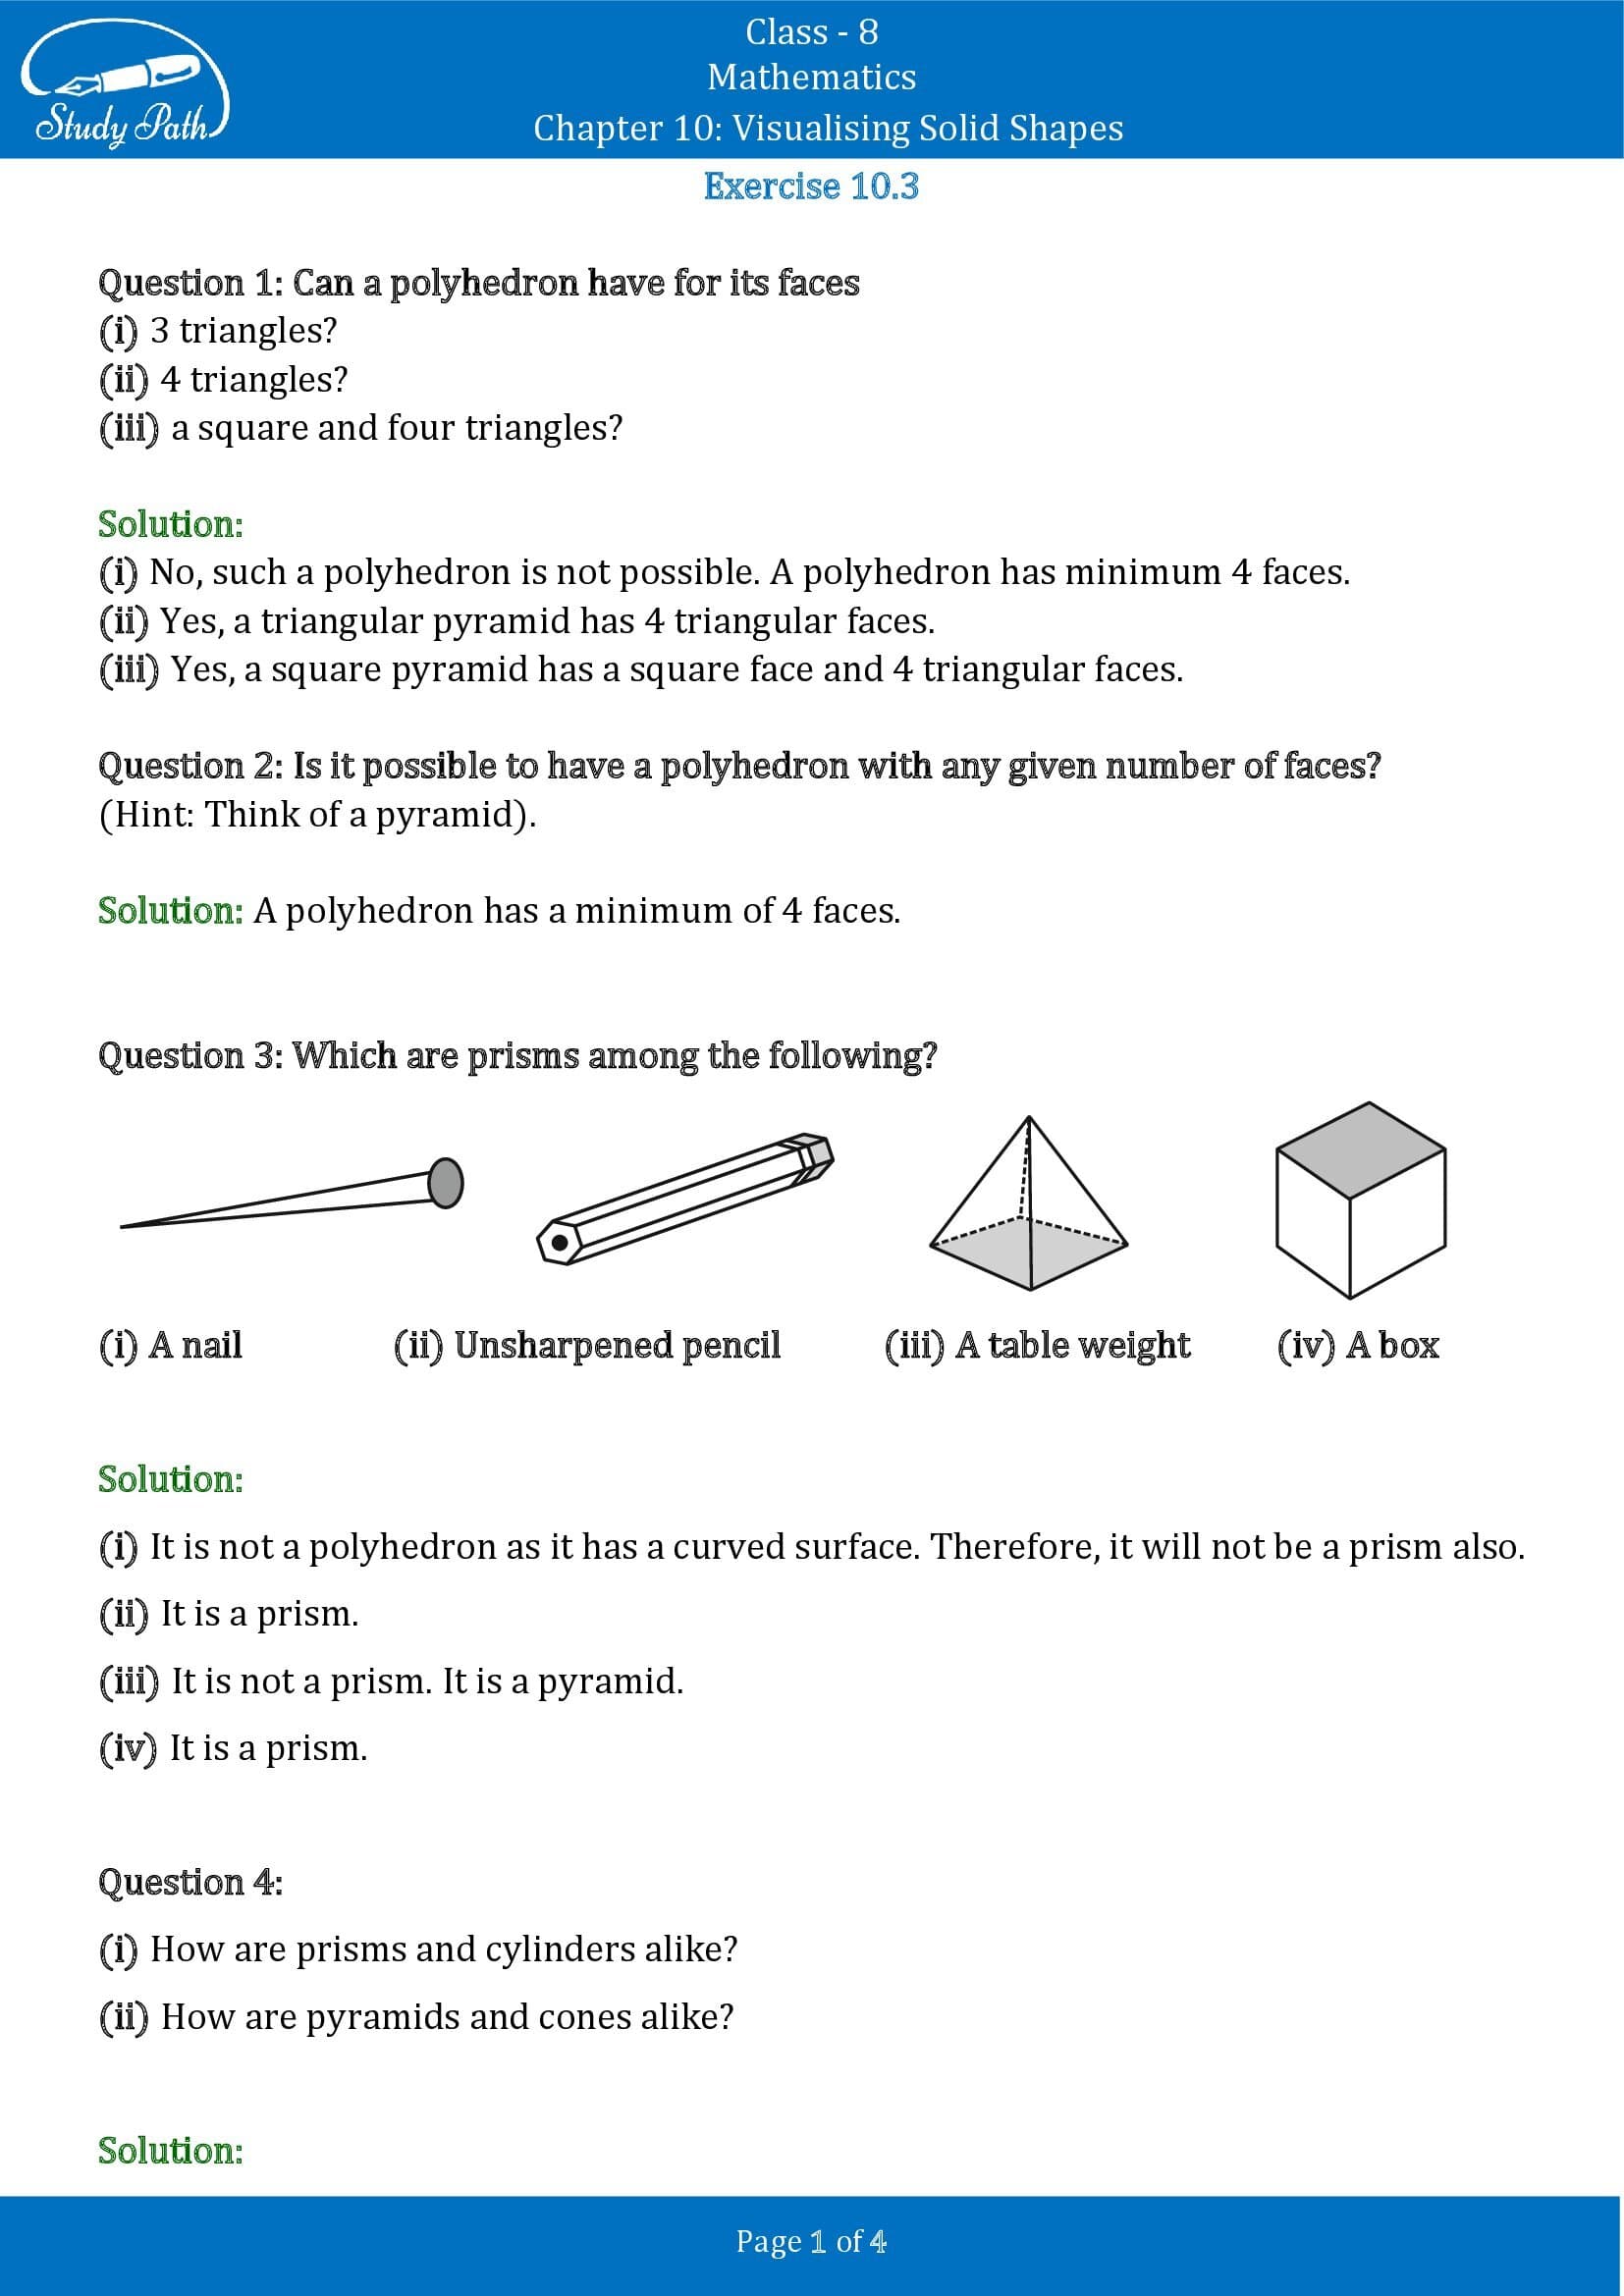 NCERT Solutions for Class 8 Maths Chapter 10 Visualising Solid Shapes Exercise 10.3 00001